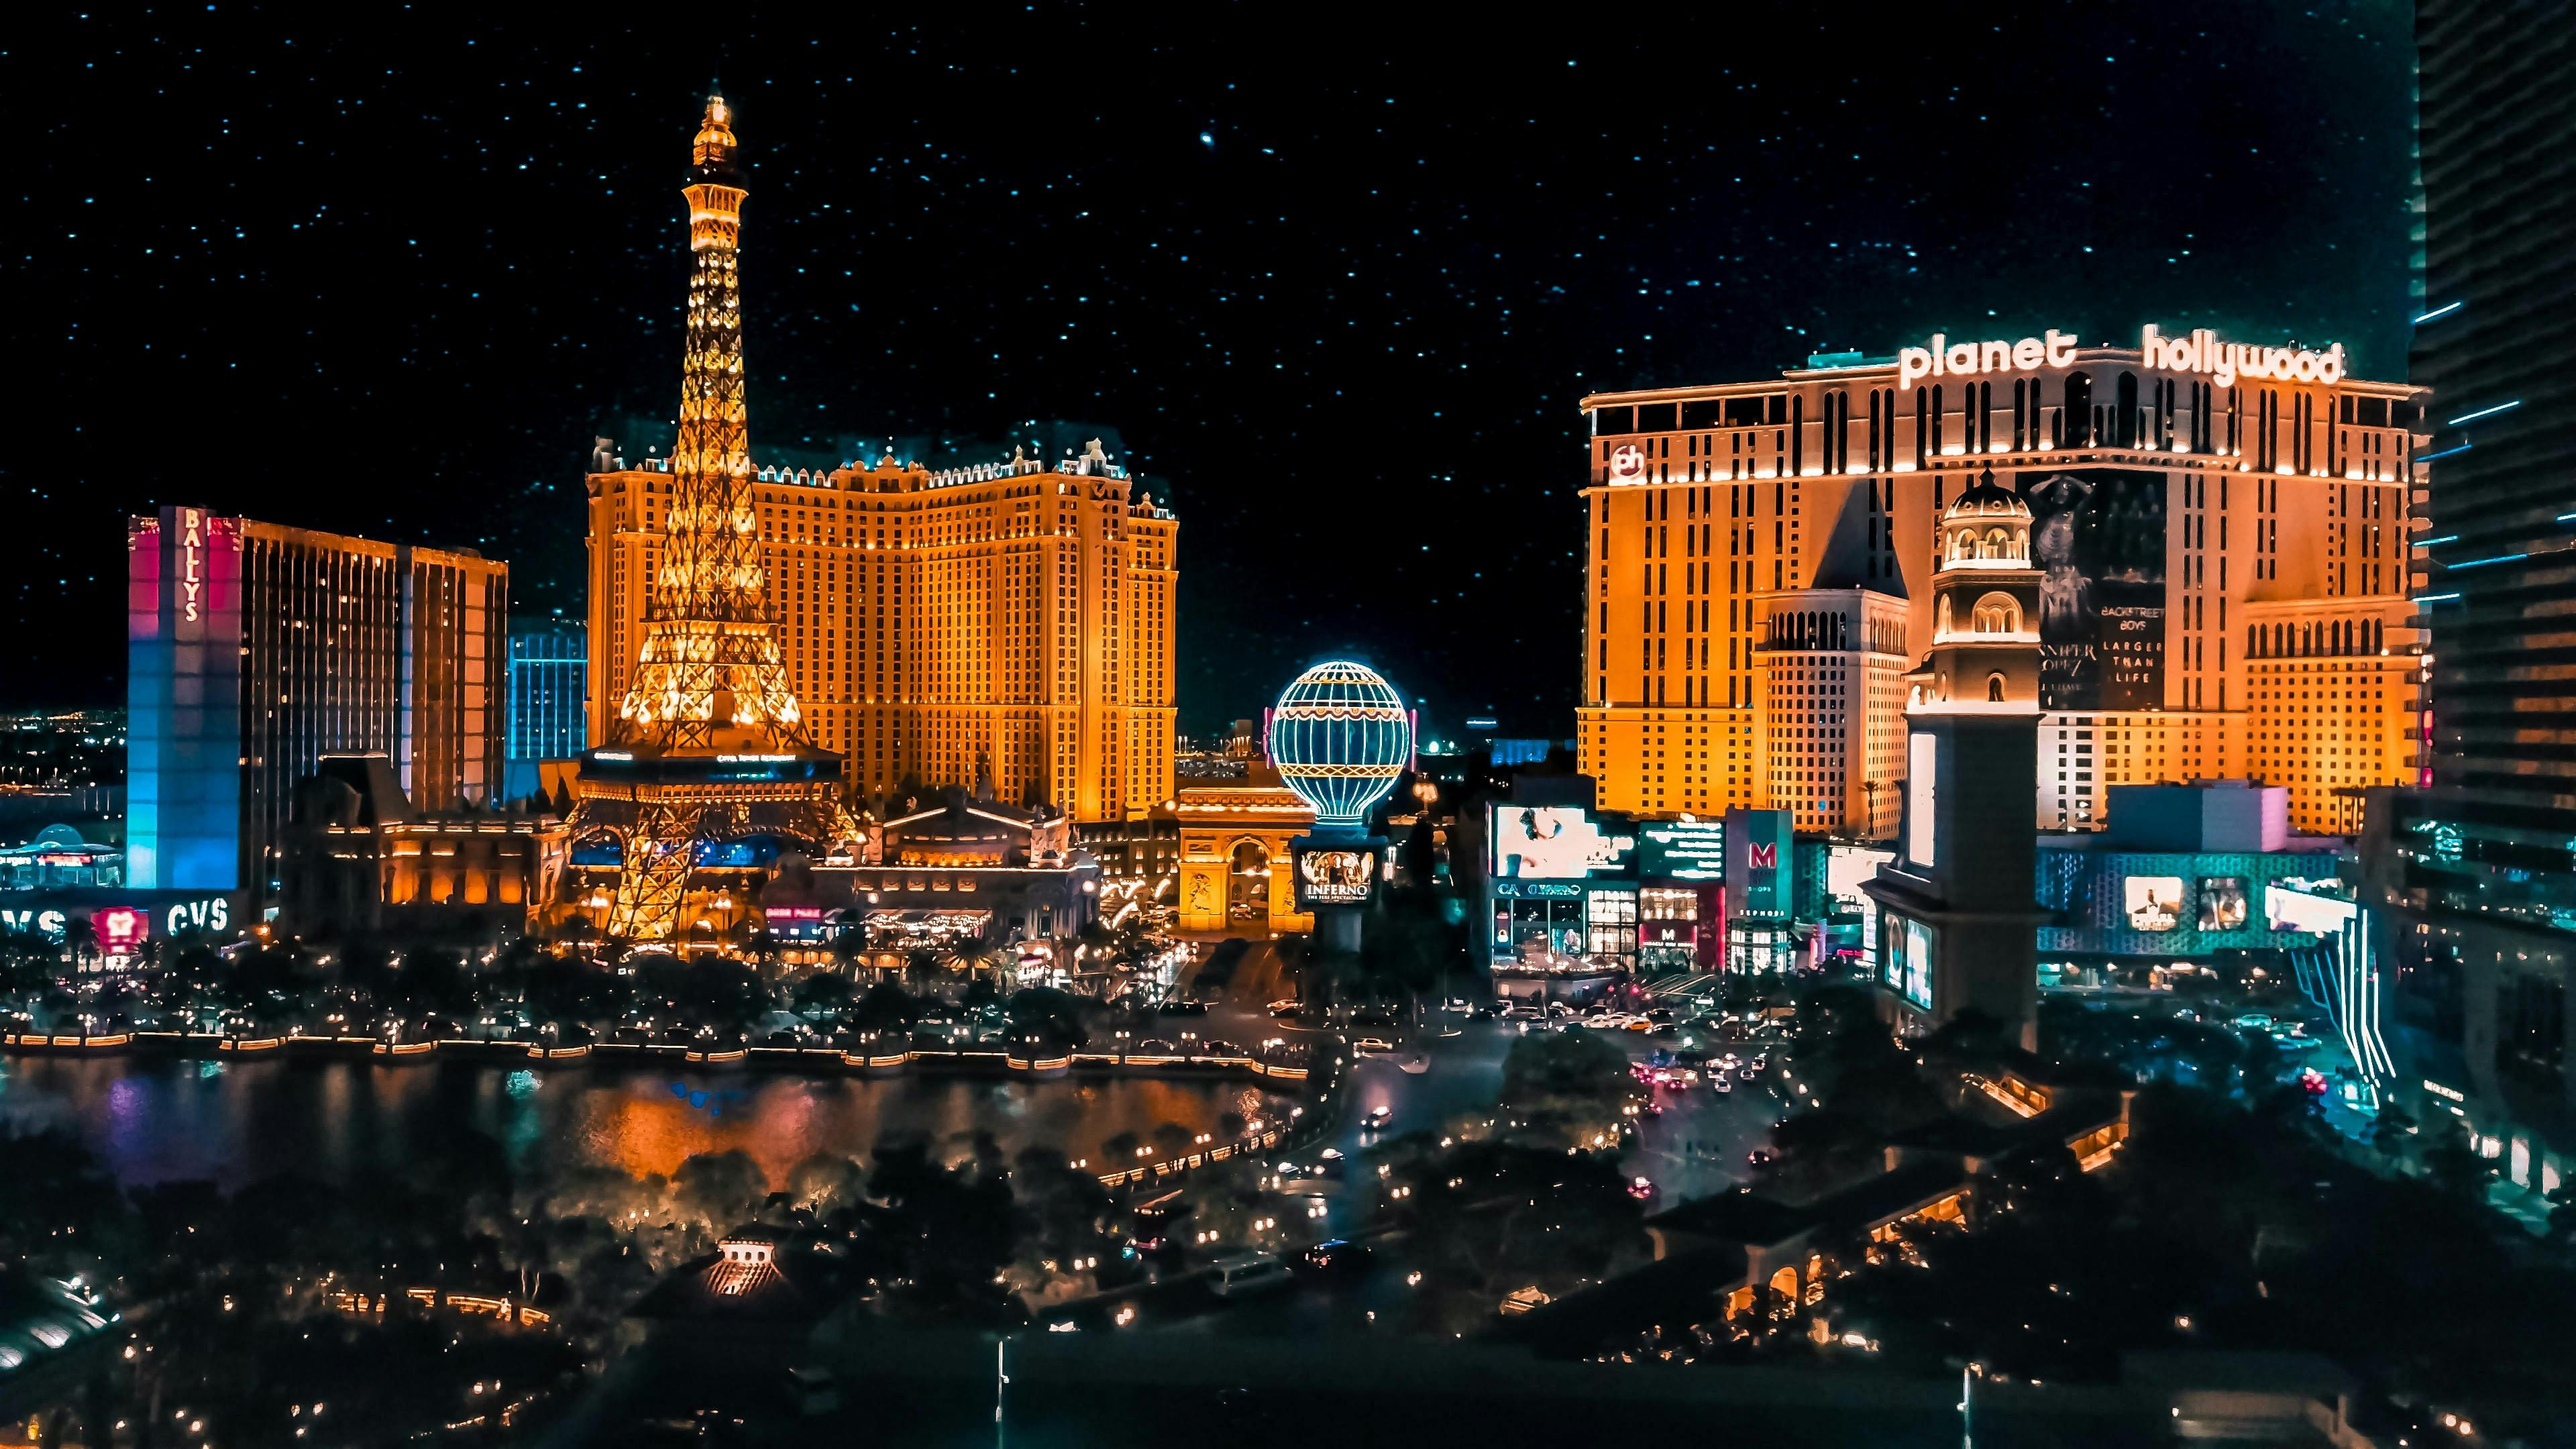 Helpful Tips for Staying at PARIS LAS VEGAS in 2023 